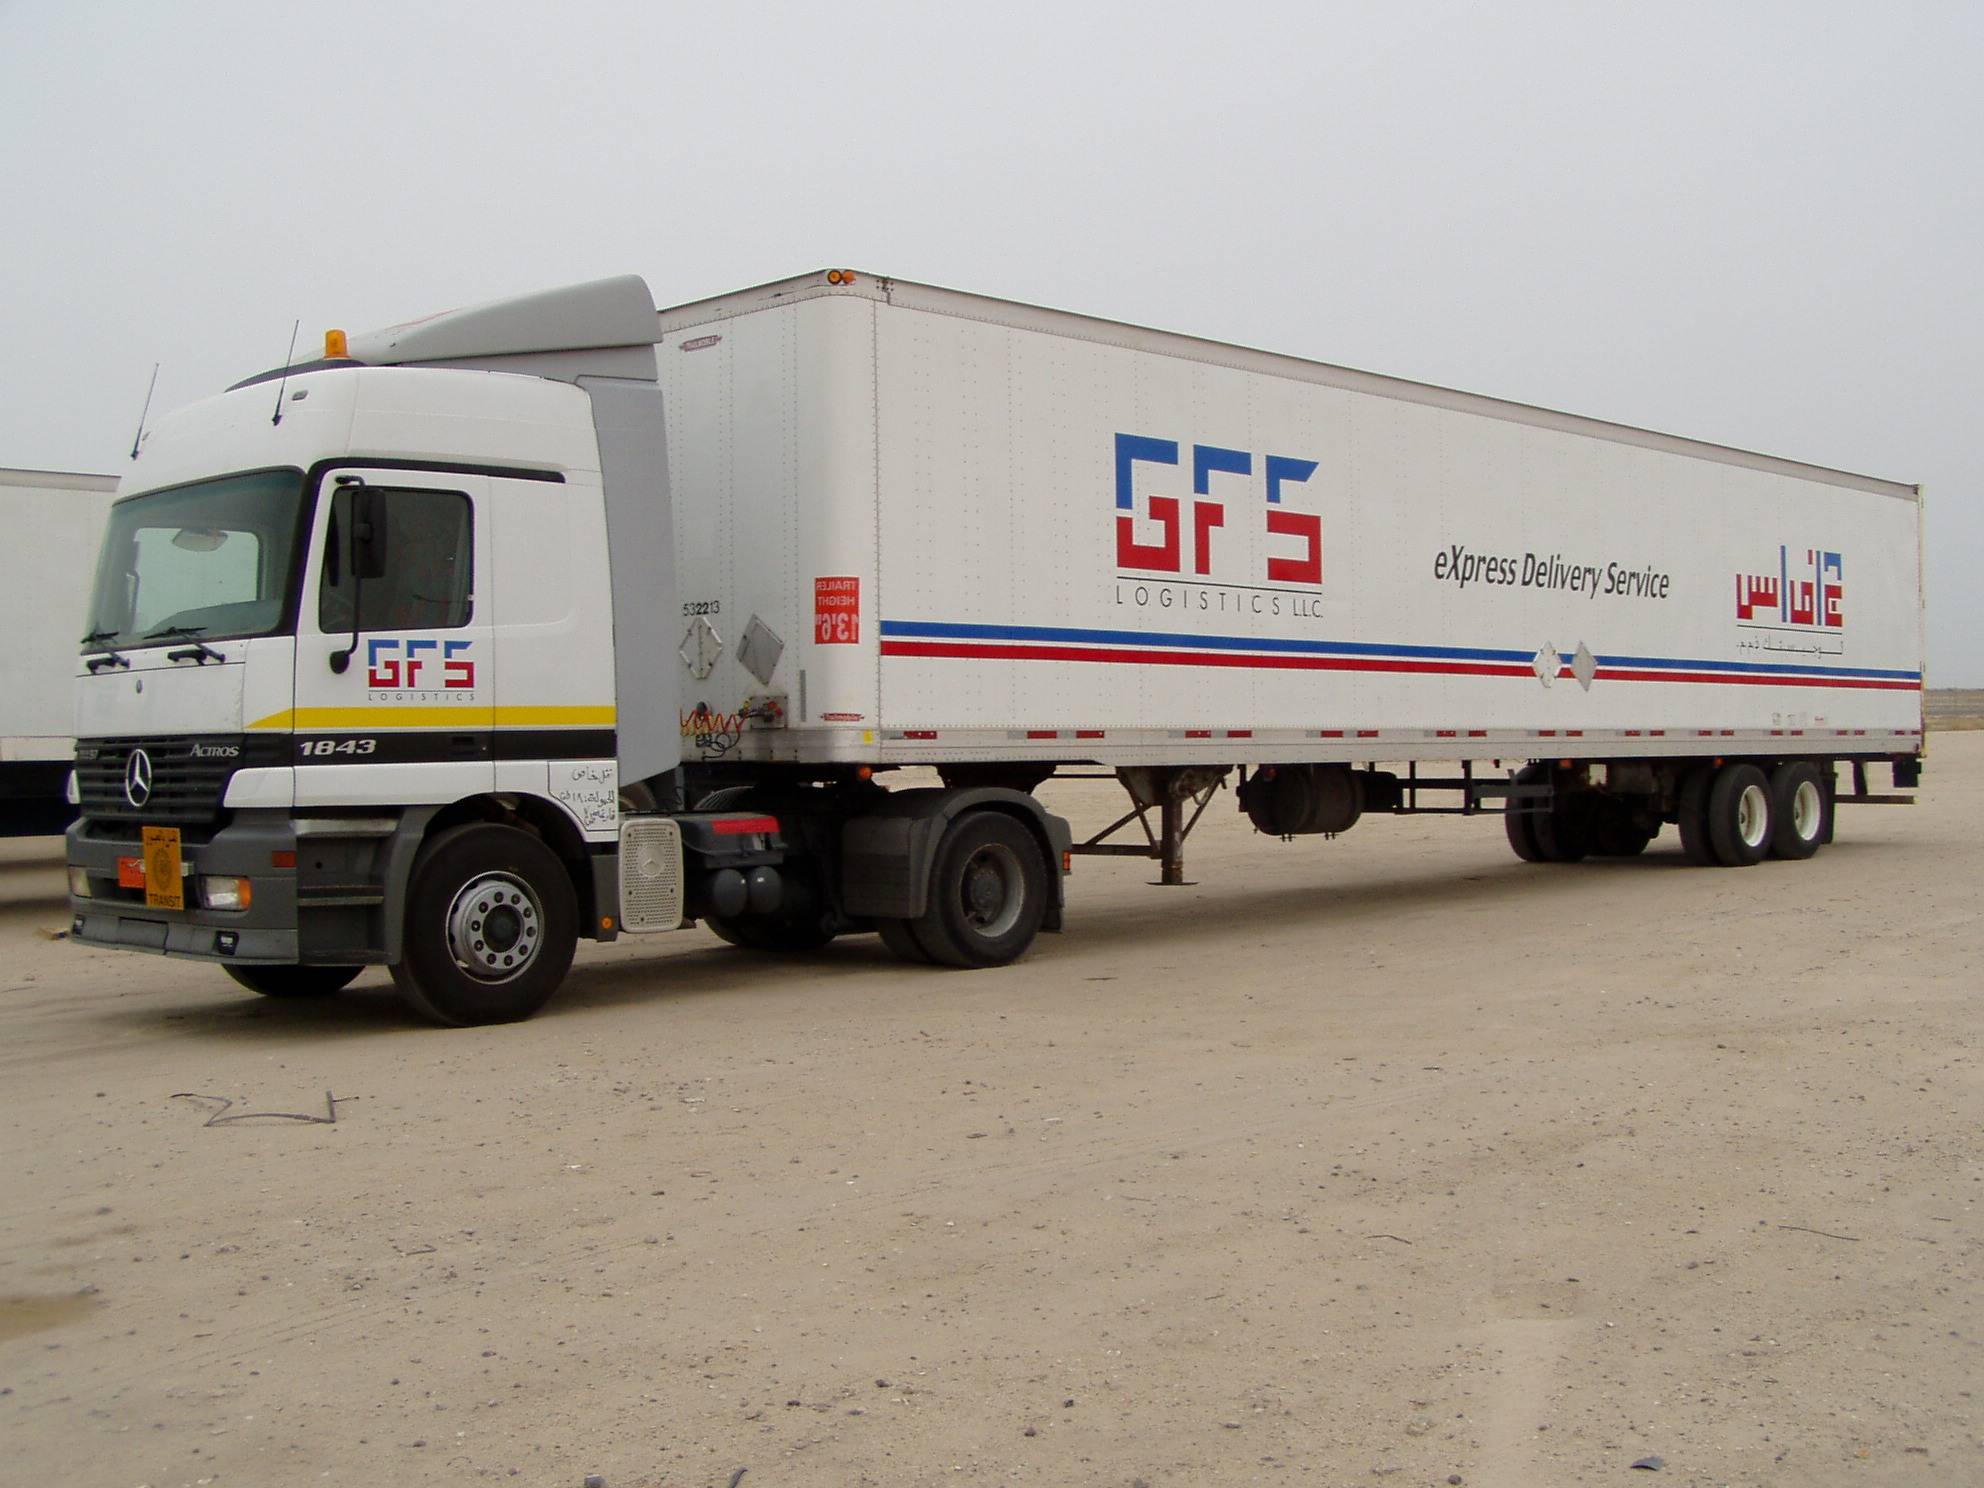 gfs express delivery services